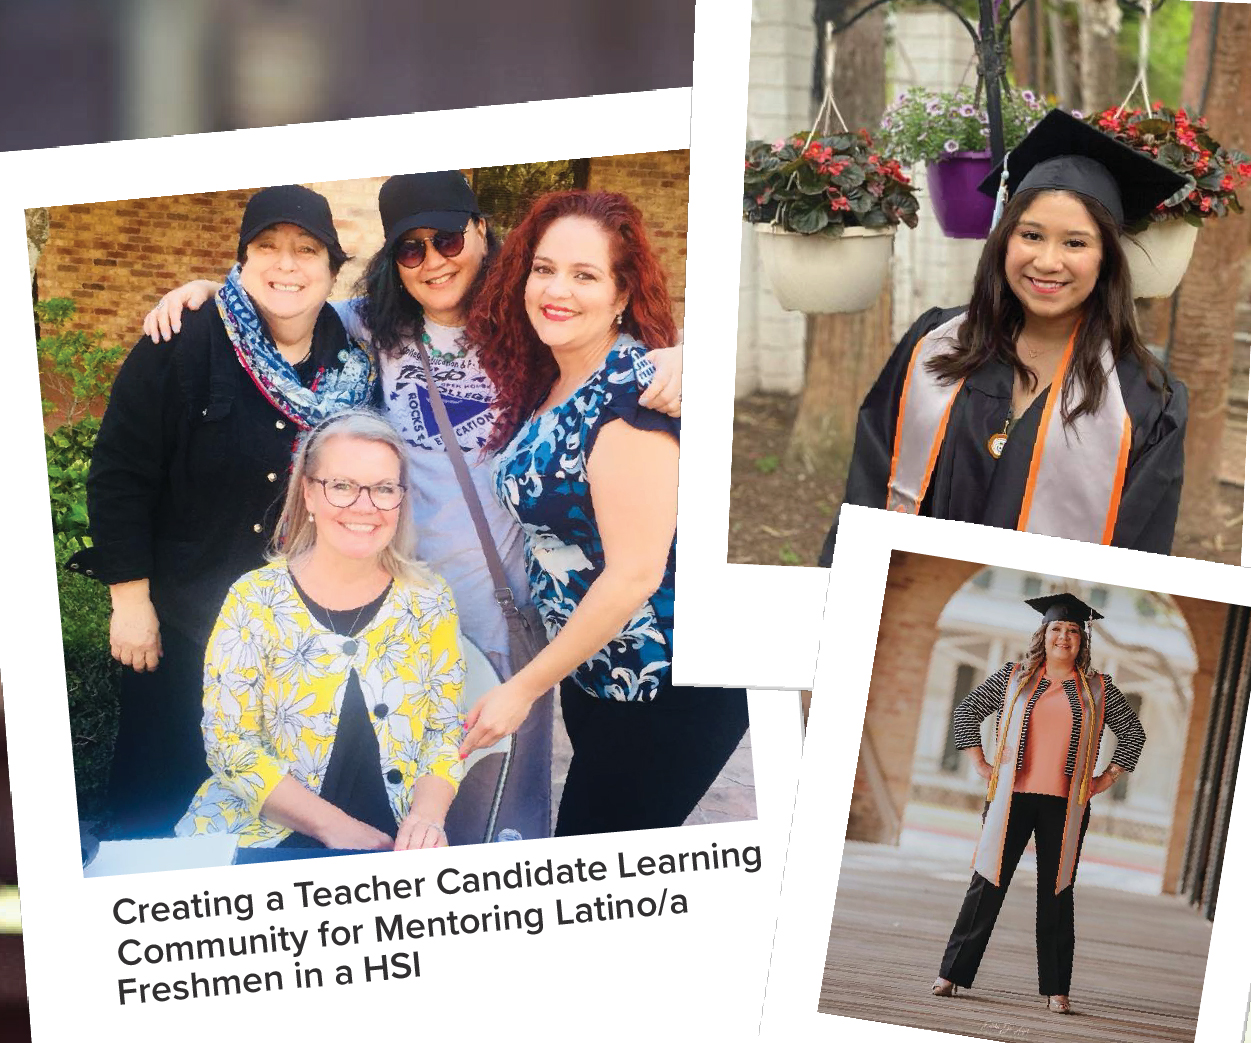 Creating a Teacher Candidate Learning Community for Mentoring Latino/a Freshmen in a HSI